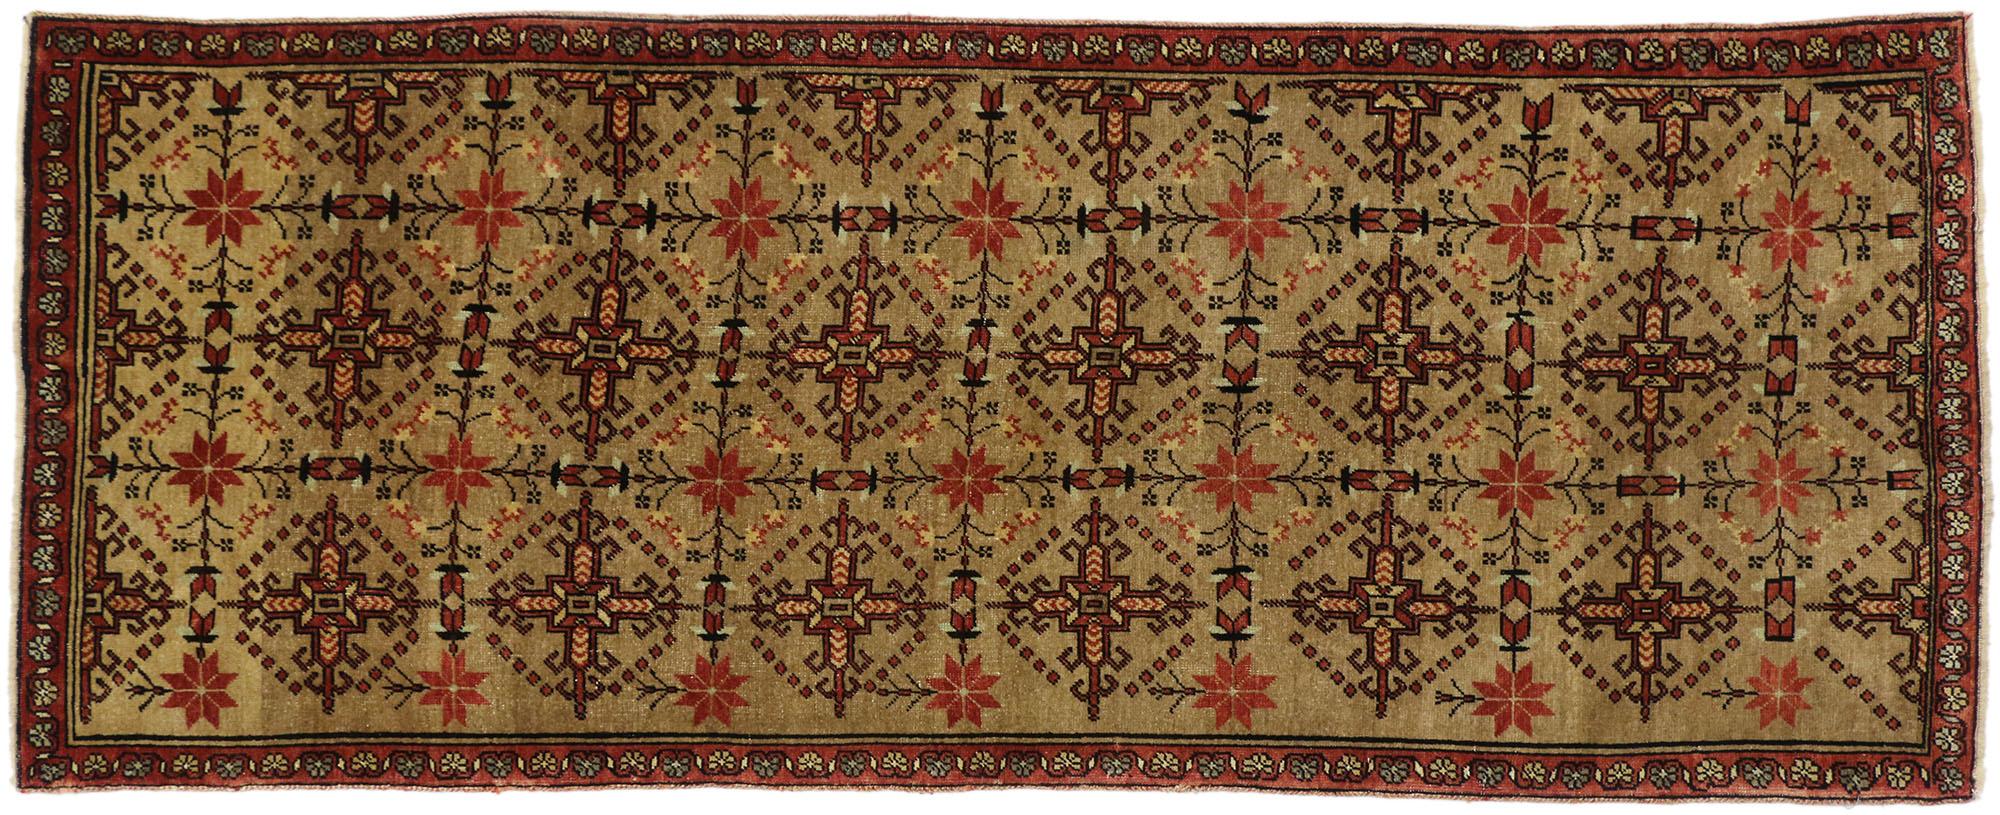 50458, vintage Turkish Oushak runner with modern tribal style, hallway runner. This hand-knotted wool vintage Turkish Oushak runner features an allover pattern with hooked crosses and poinsettia-like blossoms on a variegated camel and ecru colored